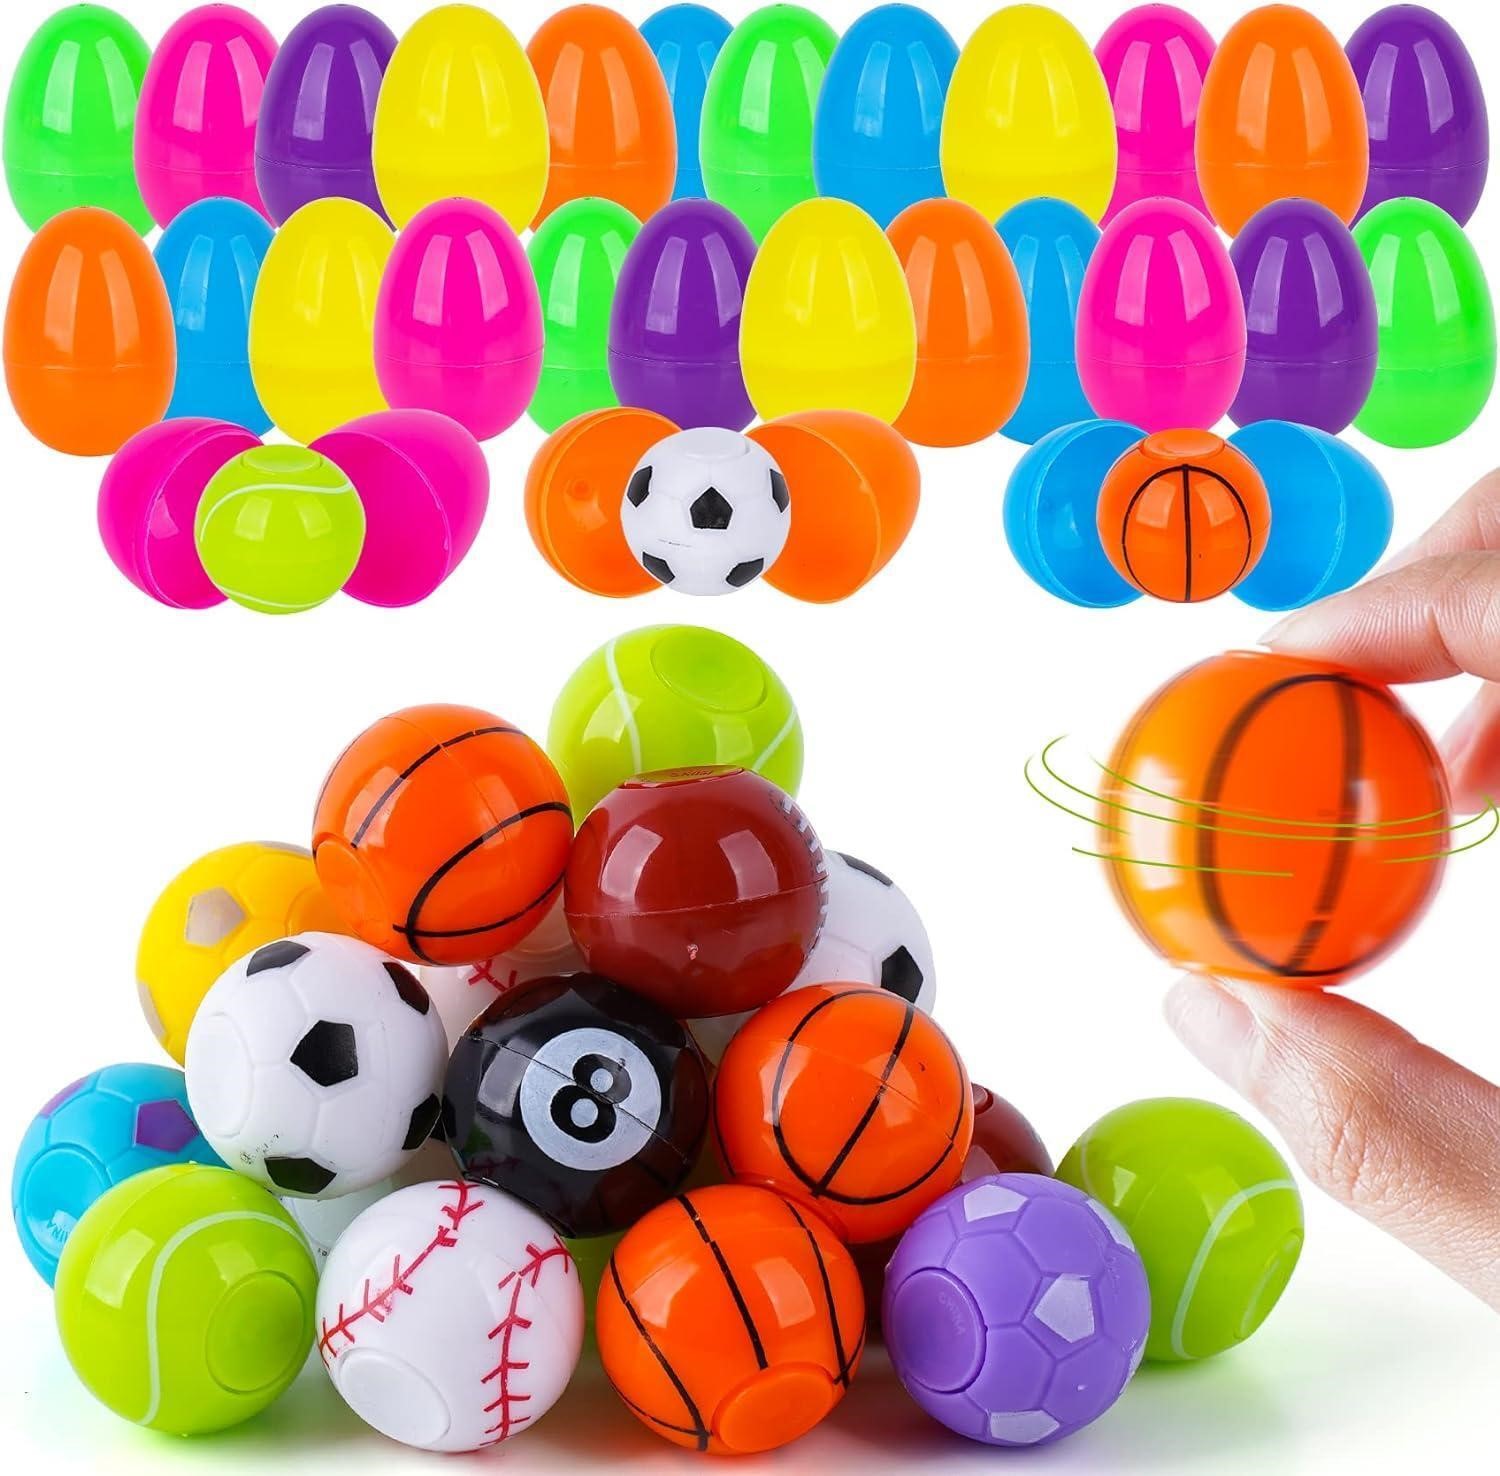 Easter Eggs with Toys, 48 Pcs Set x4